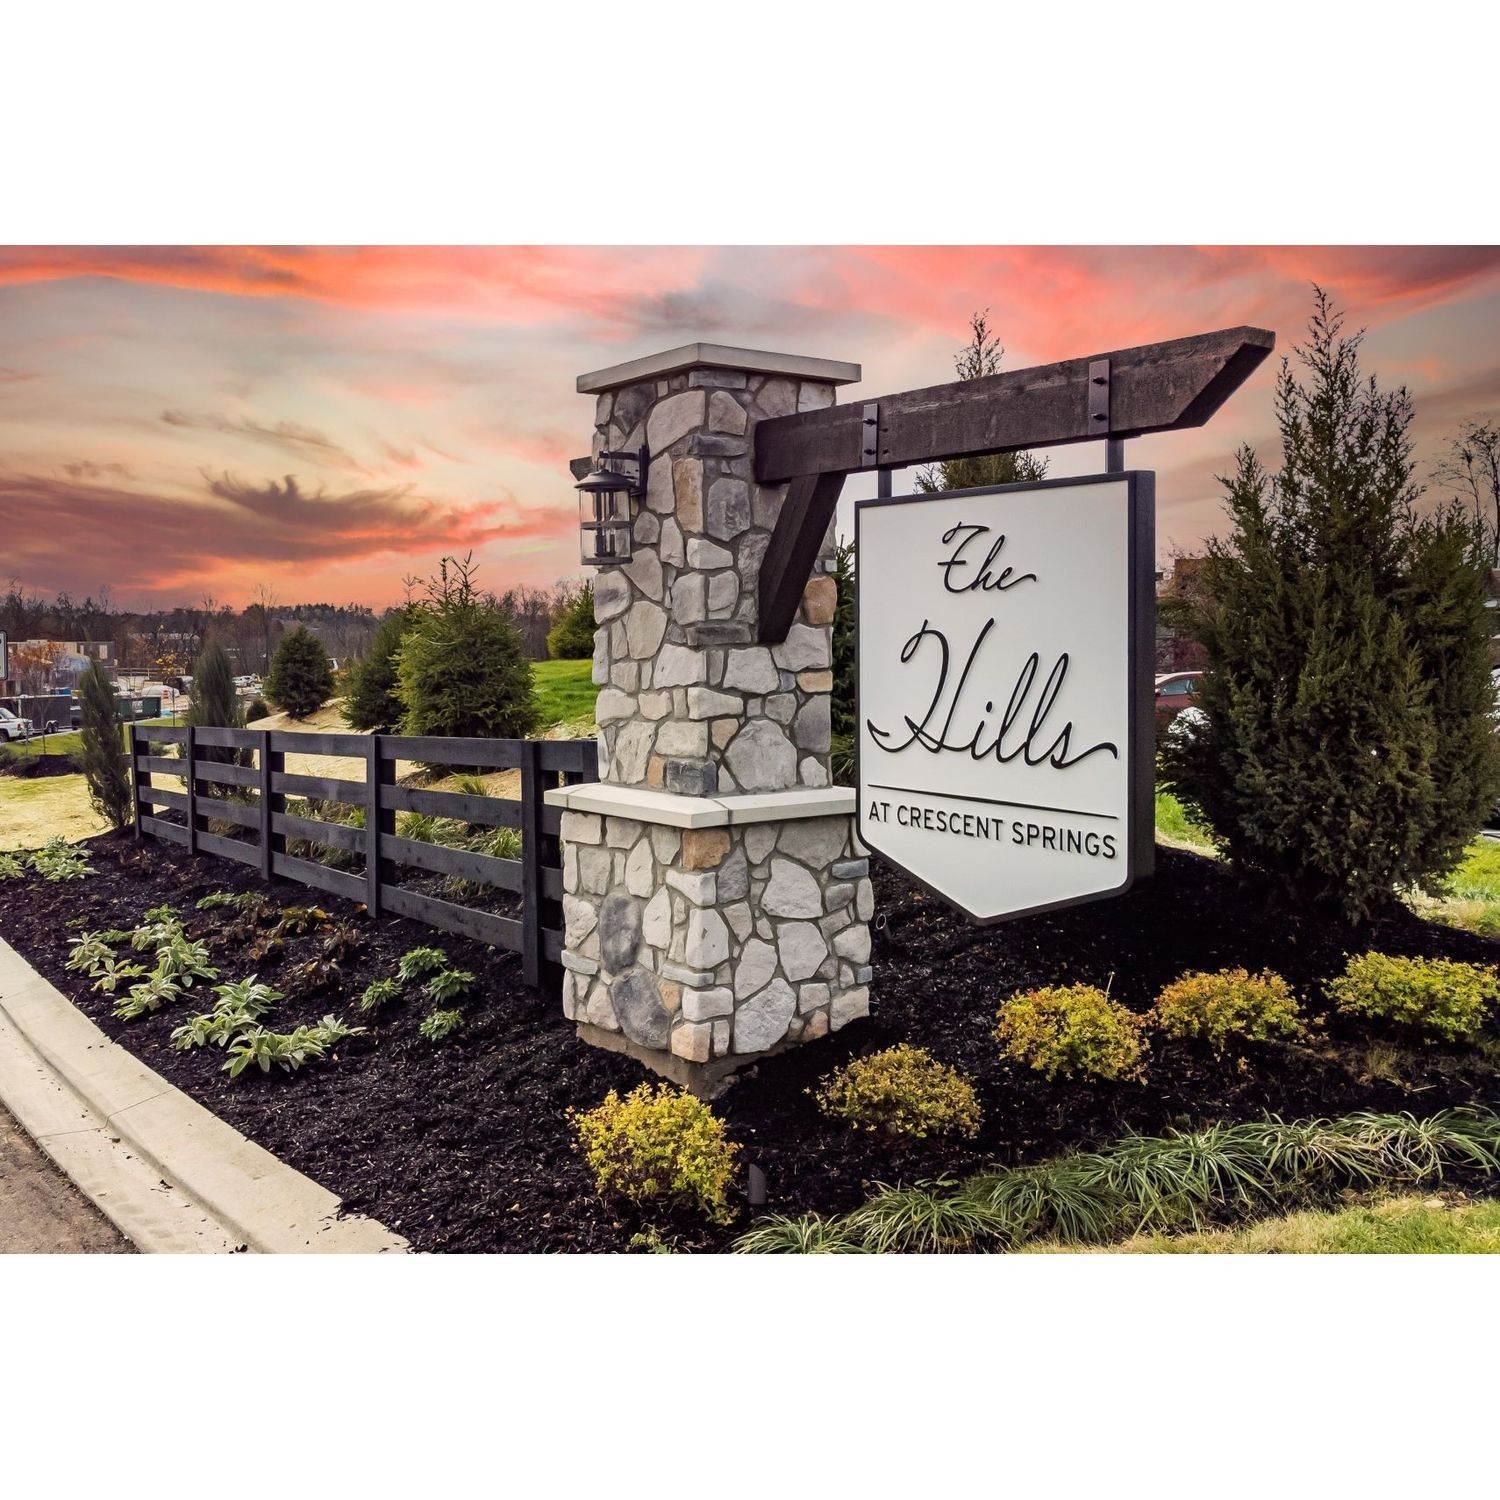 14. The Hills at Crescent Springs建于 2301 Woodhill Court, Crescent Springs, KY 41017